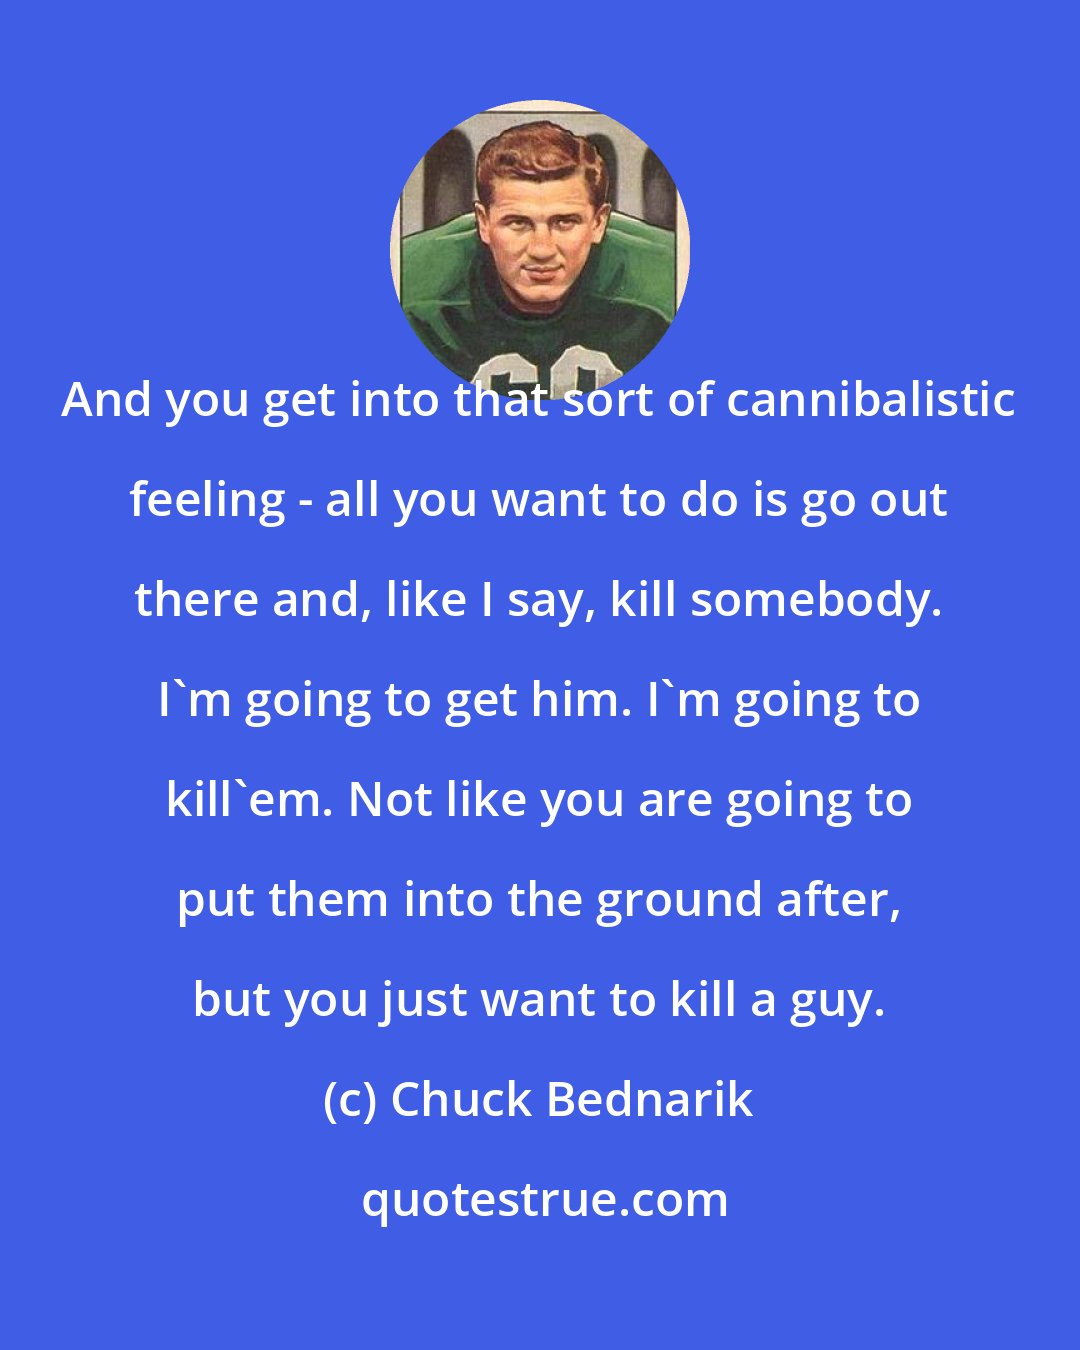 Chuck Bednarik: And you get into that sort of cannibalistic feeling - all you want to do is go out there and, like I say, kill somebody. I'm going to get him. I'm going to kill'em. Not like you are going to put them into the ground after, but you just want to kill a guy.